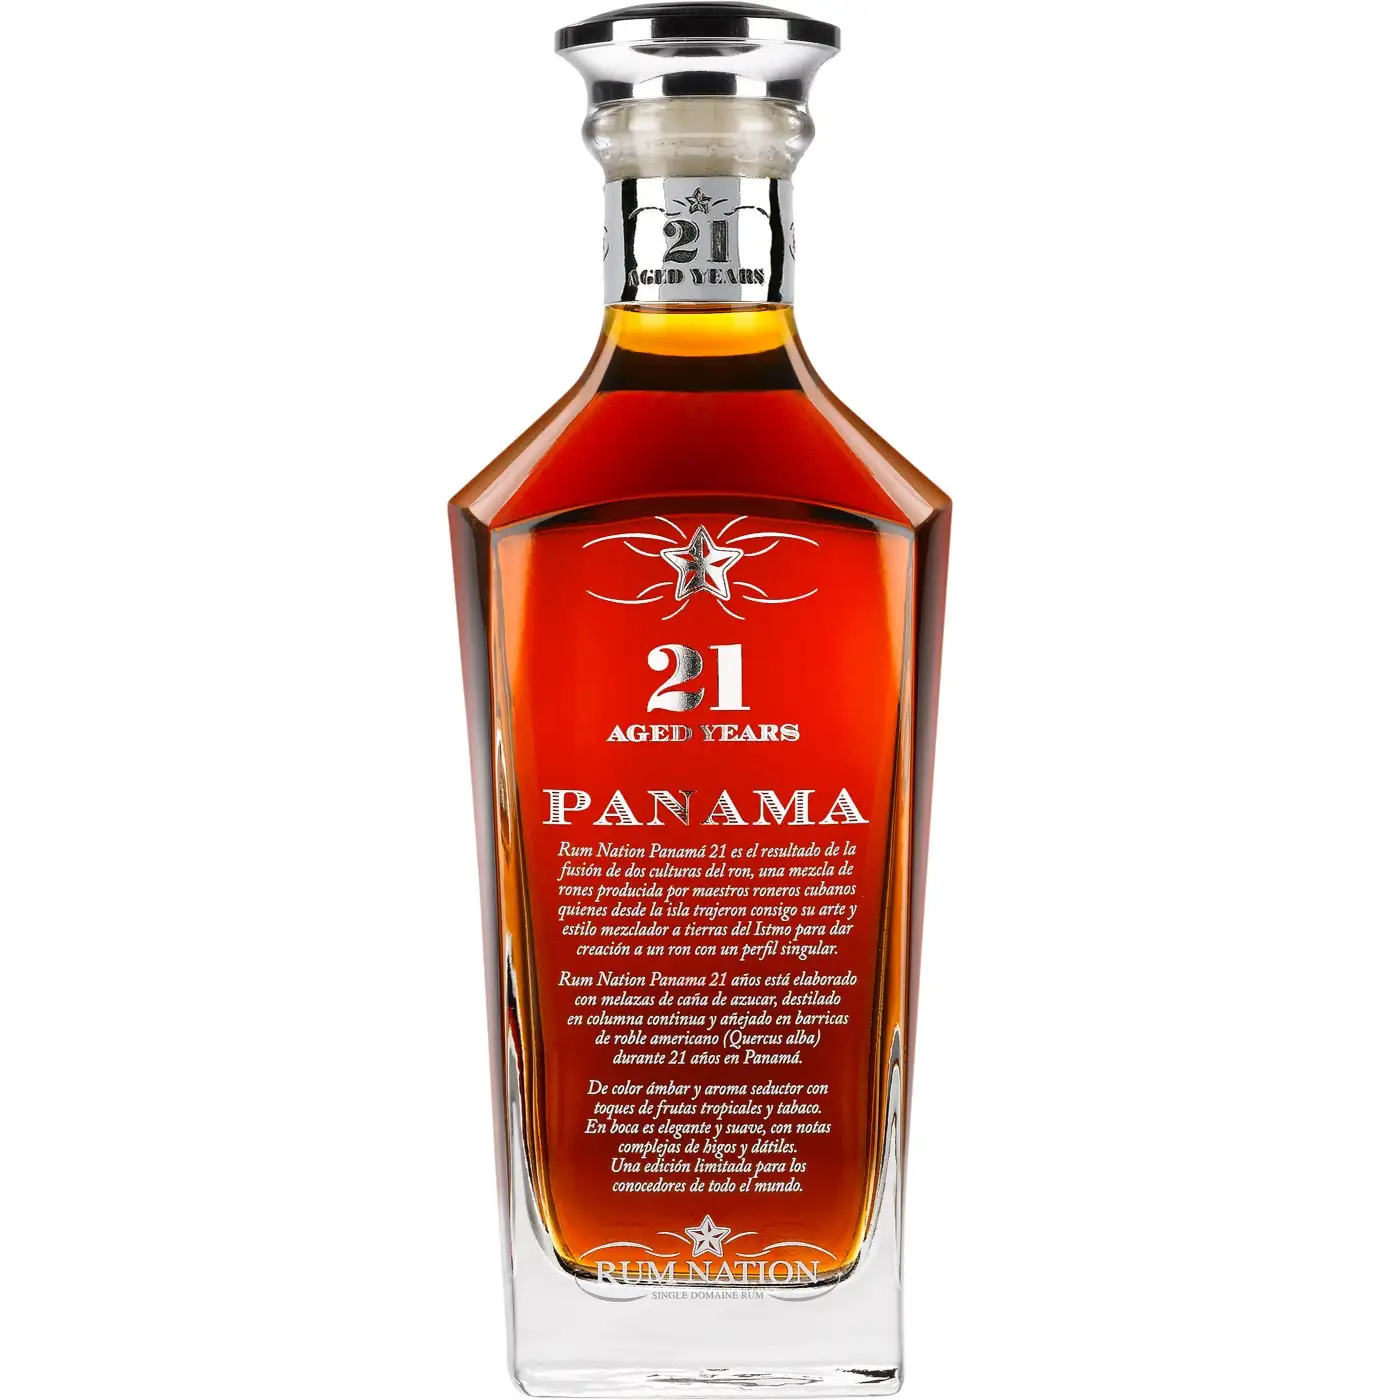 Image of the front of the bottle of the rum Panama Decanter 21 Years